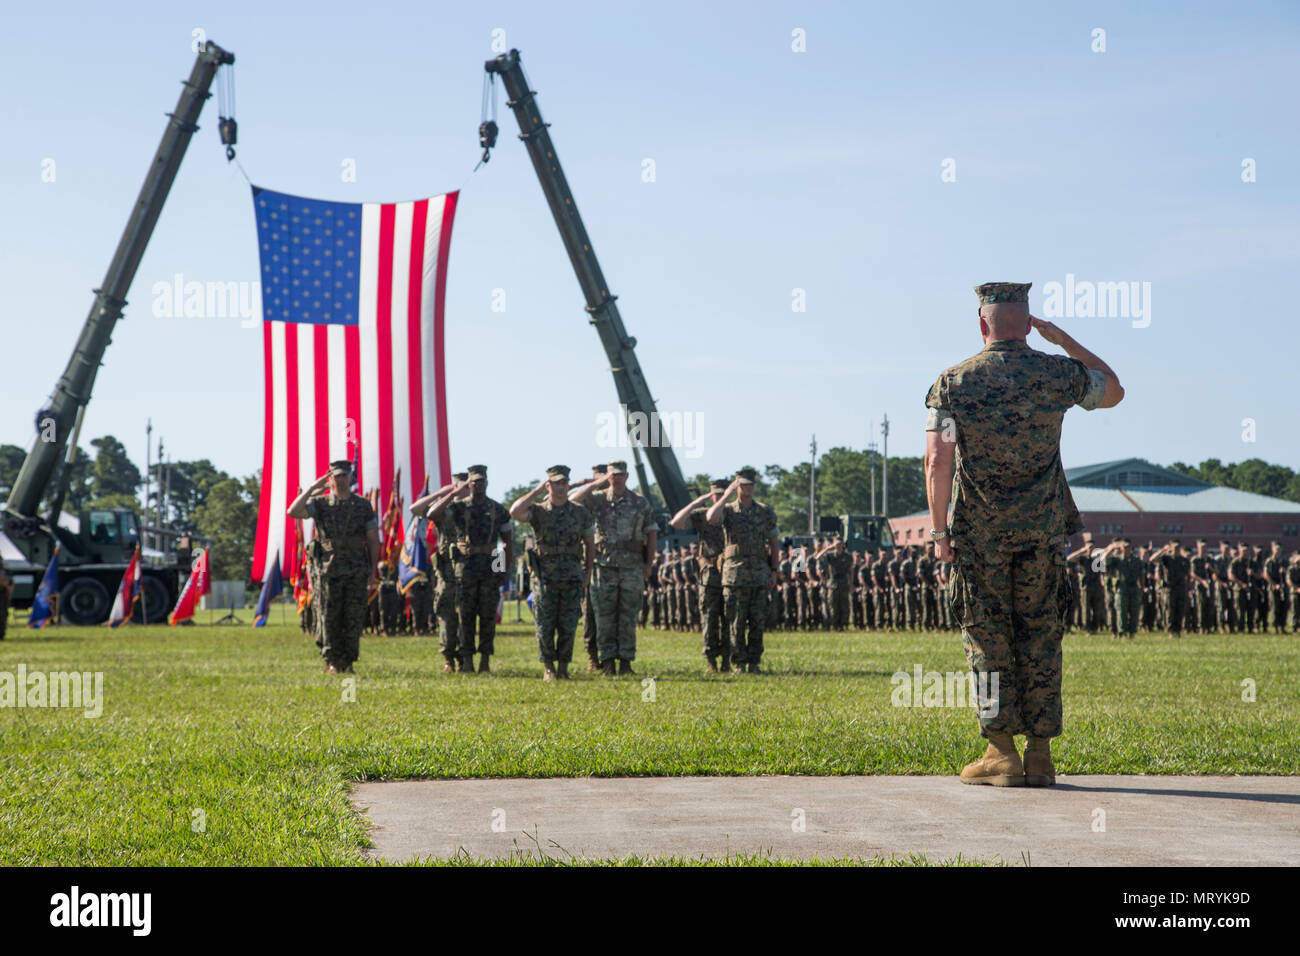 U.S. Marine Corps Lt. Gen. Robert F. Hedelund, commanding general of the II Marine Expeditionary Force (MEF) salutes Marines during a change of command ceremony on Camp Lejeune, N.C., July 14, 2017. During the ceremony, Maj. Gen. Walter L. Miller Jr. relinquished his command as commanding general of II MEF to Hedelund. (U.S. Marine Corps photo by Lance Cpl. Koby I. Saunders) Stock Photo